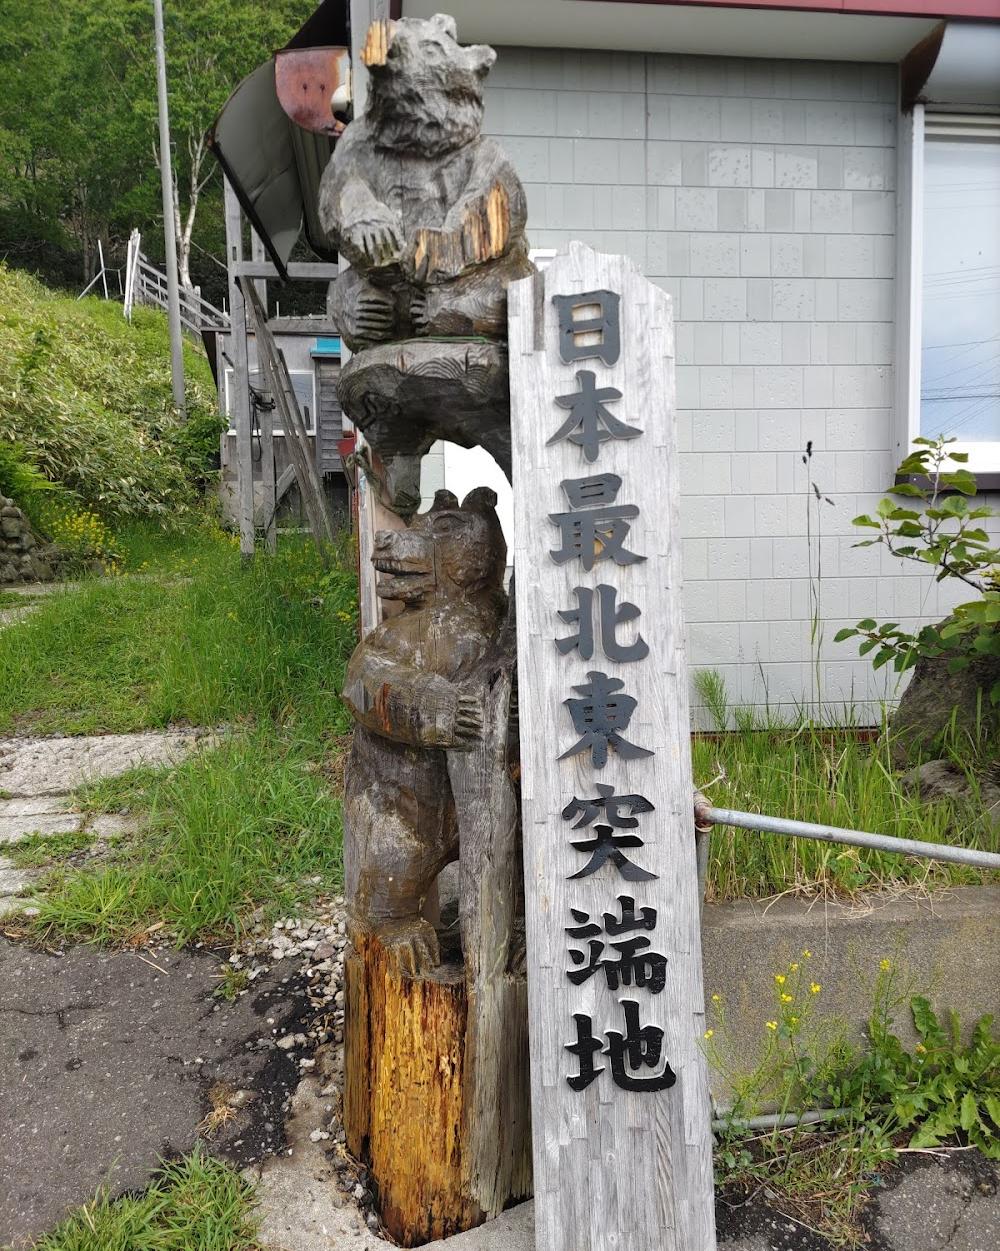 The north-easternmost guide place of Japan